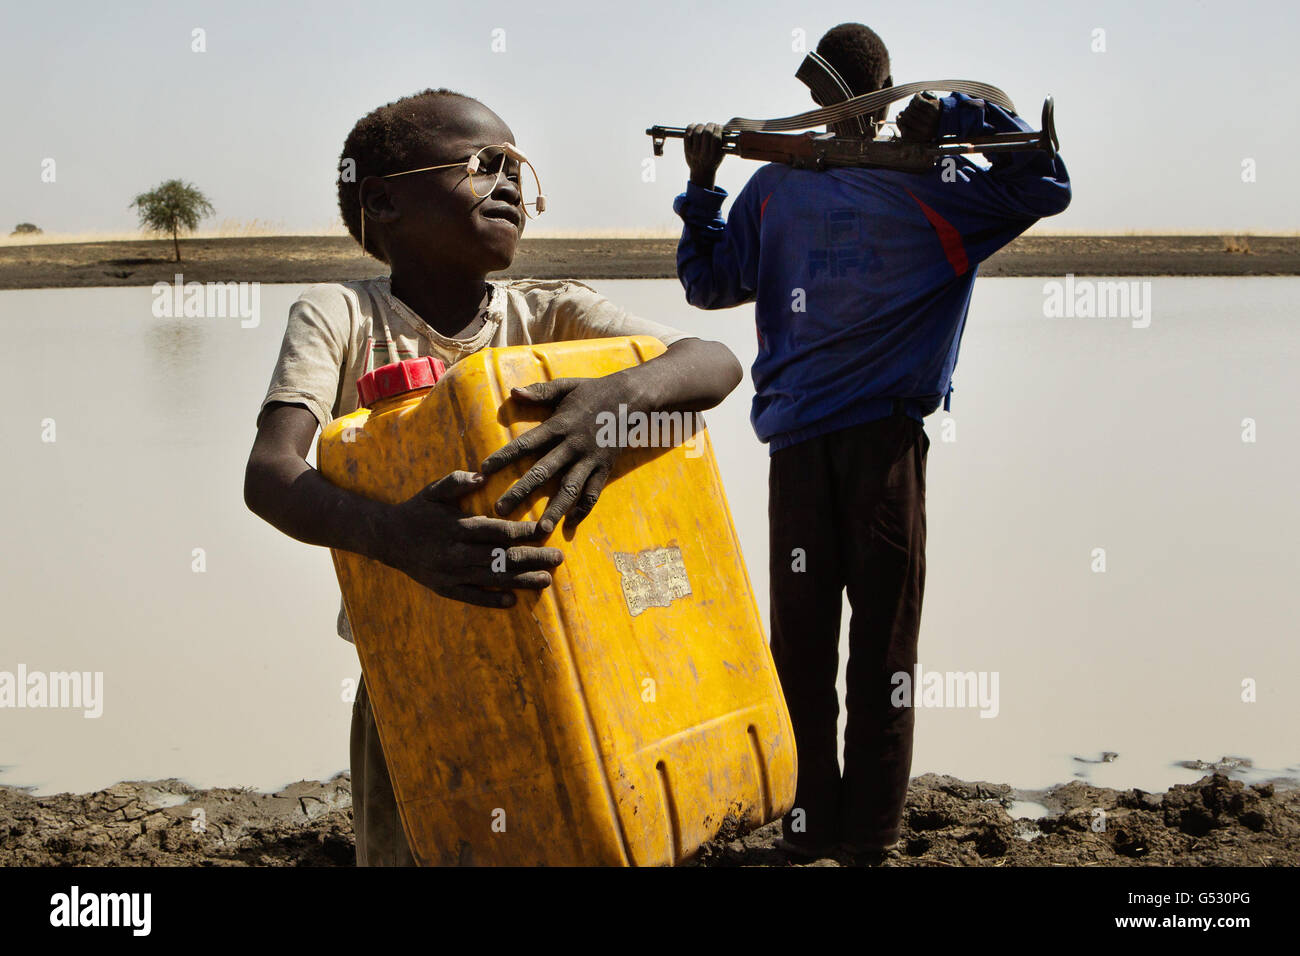 A young boy carries water in a jerry can to his village while his grandfather, the village chief, cradles an AK 47 rifle watching out for cattle rustlers and lions, at the only water source in the area, along the Sobat River in the Greater Upper Nile region of north-eastern South Sudan, Africa. Stock Photo